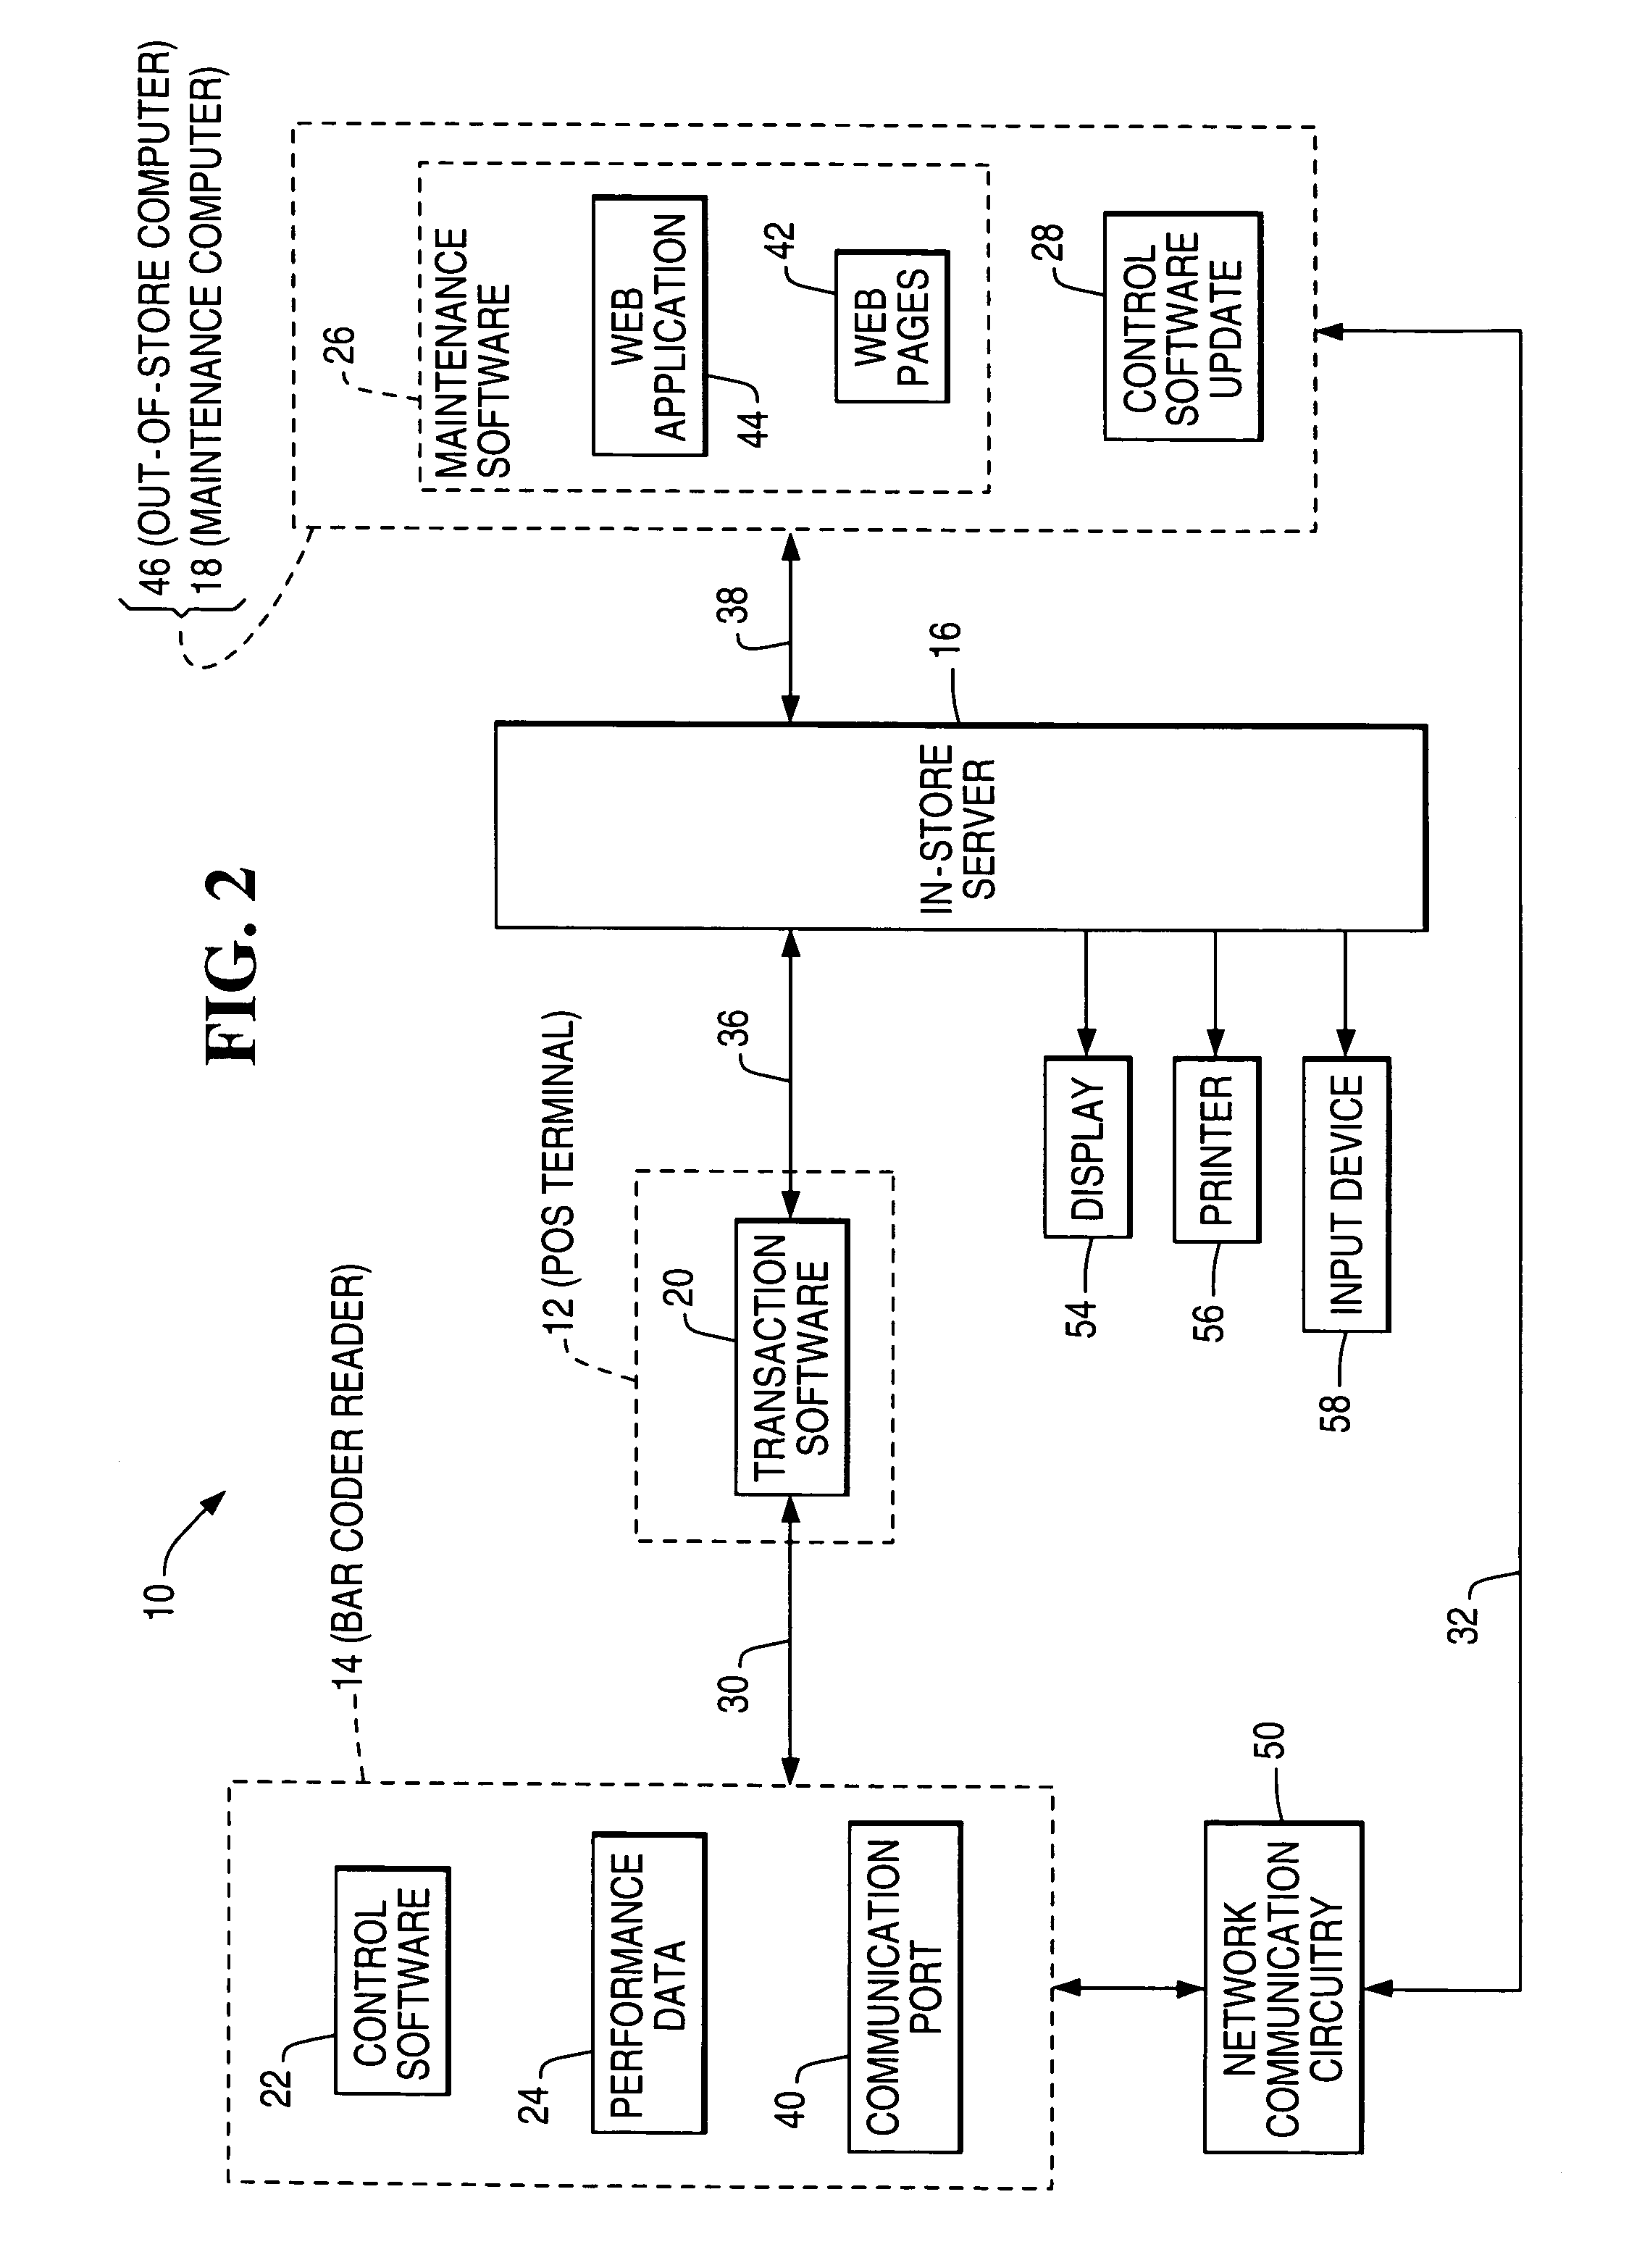 System and method of maintaining a bar code reader